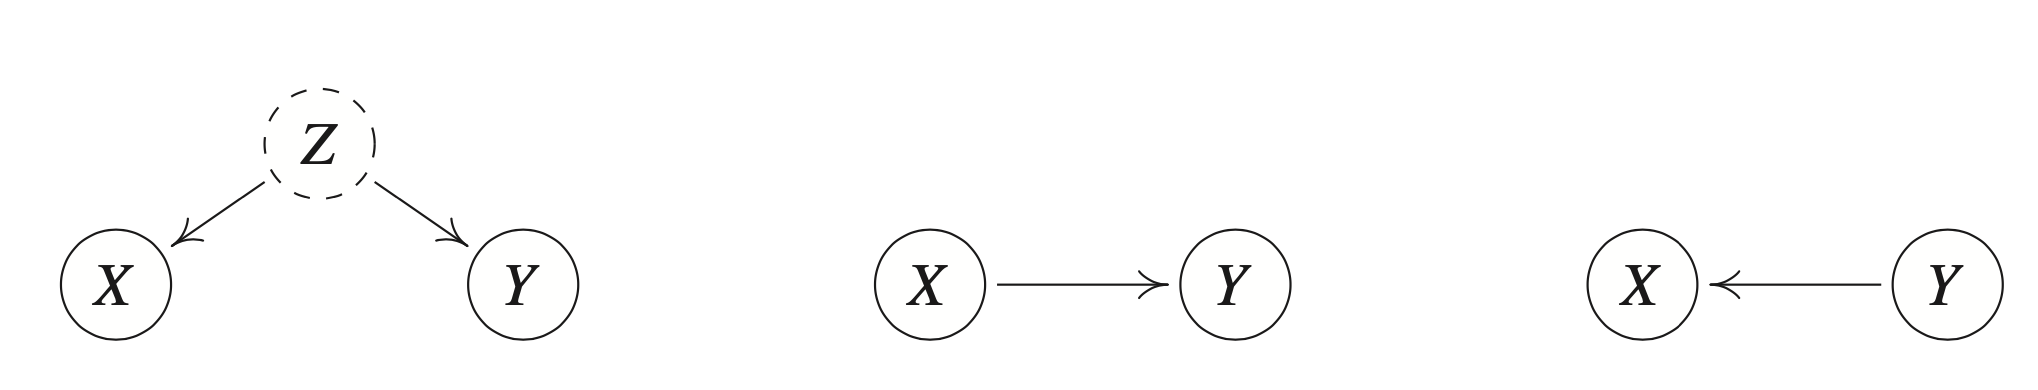 Figure 1: Reichenbach&rsquo;s common cause principle establishes a link between statistical properties and causal structures. A statistical dependence between two observables (X) and (Y) indicates taht they are caused by a (potentially new) variable (Z). In the figures cause is denoted through arrows.